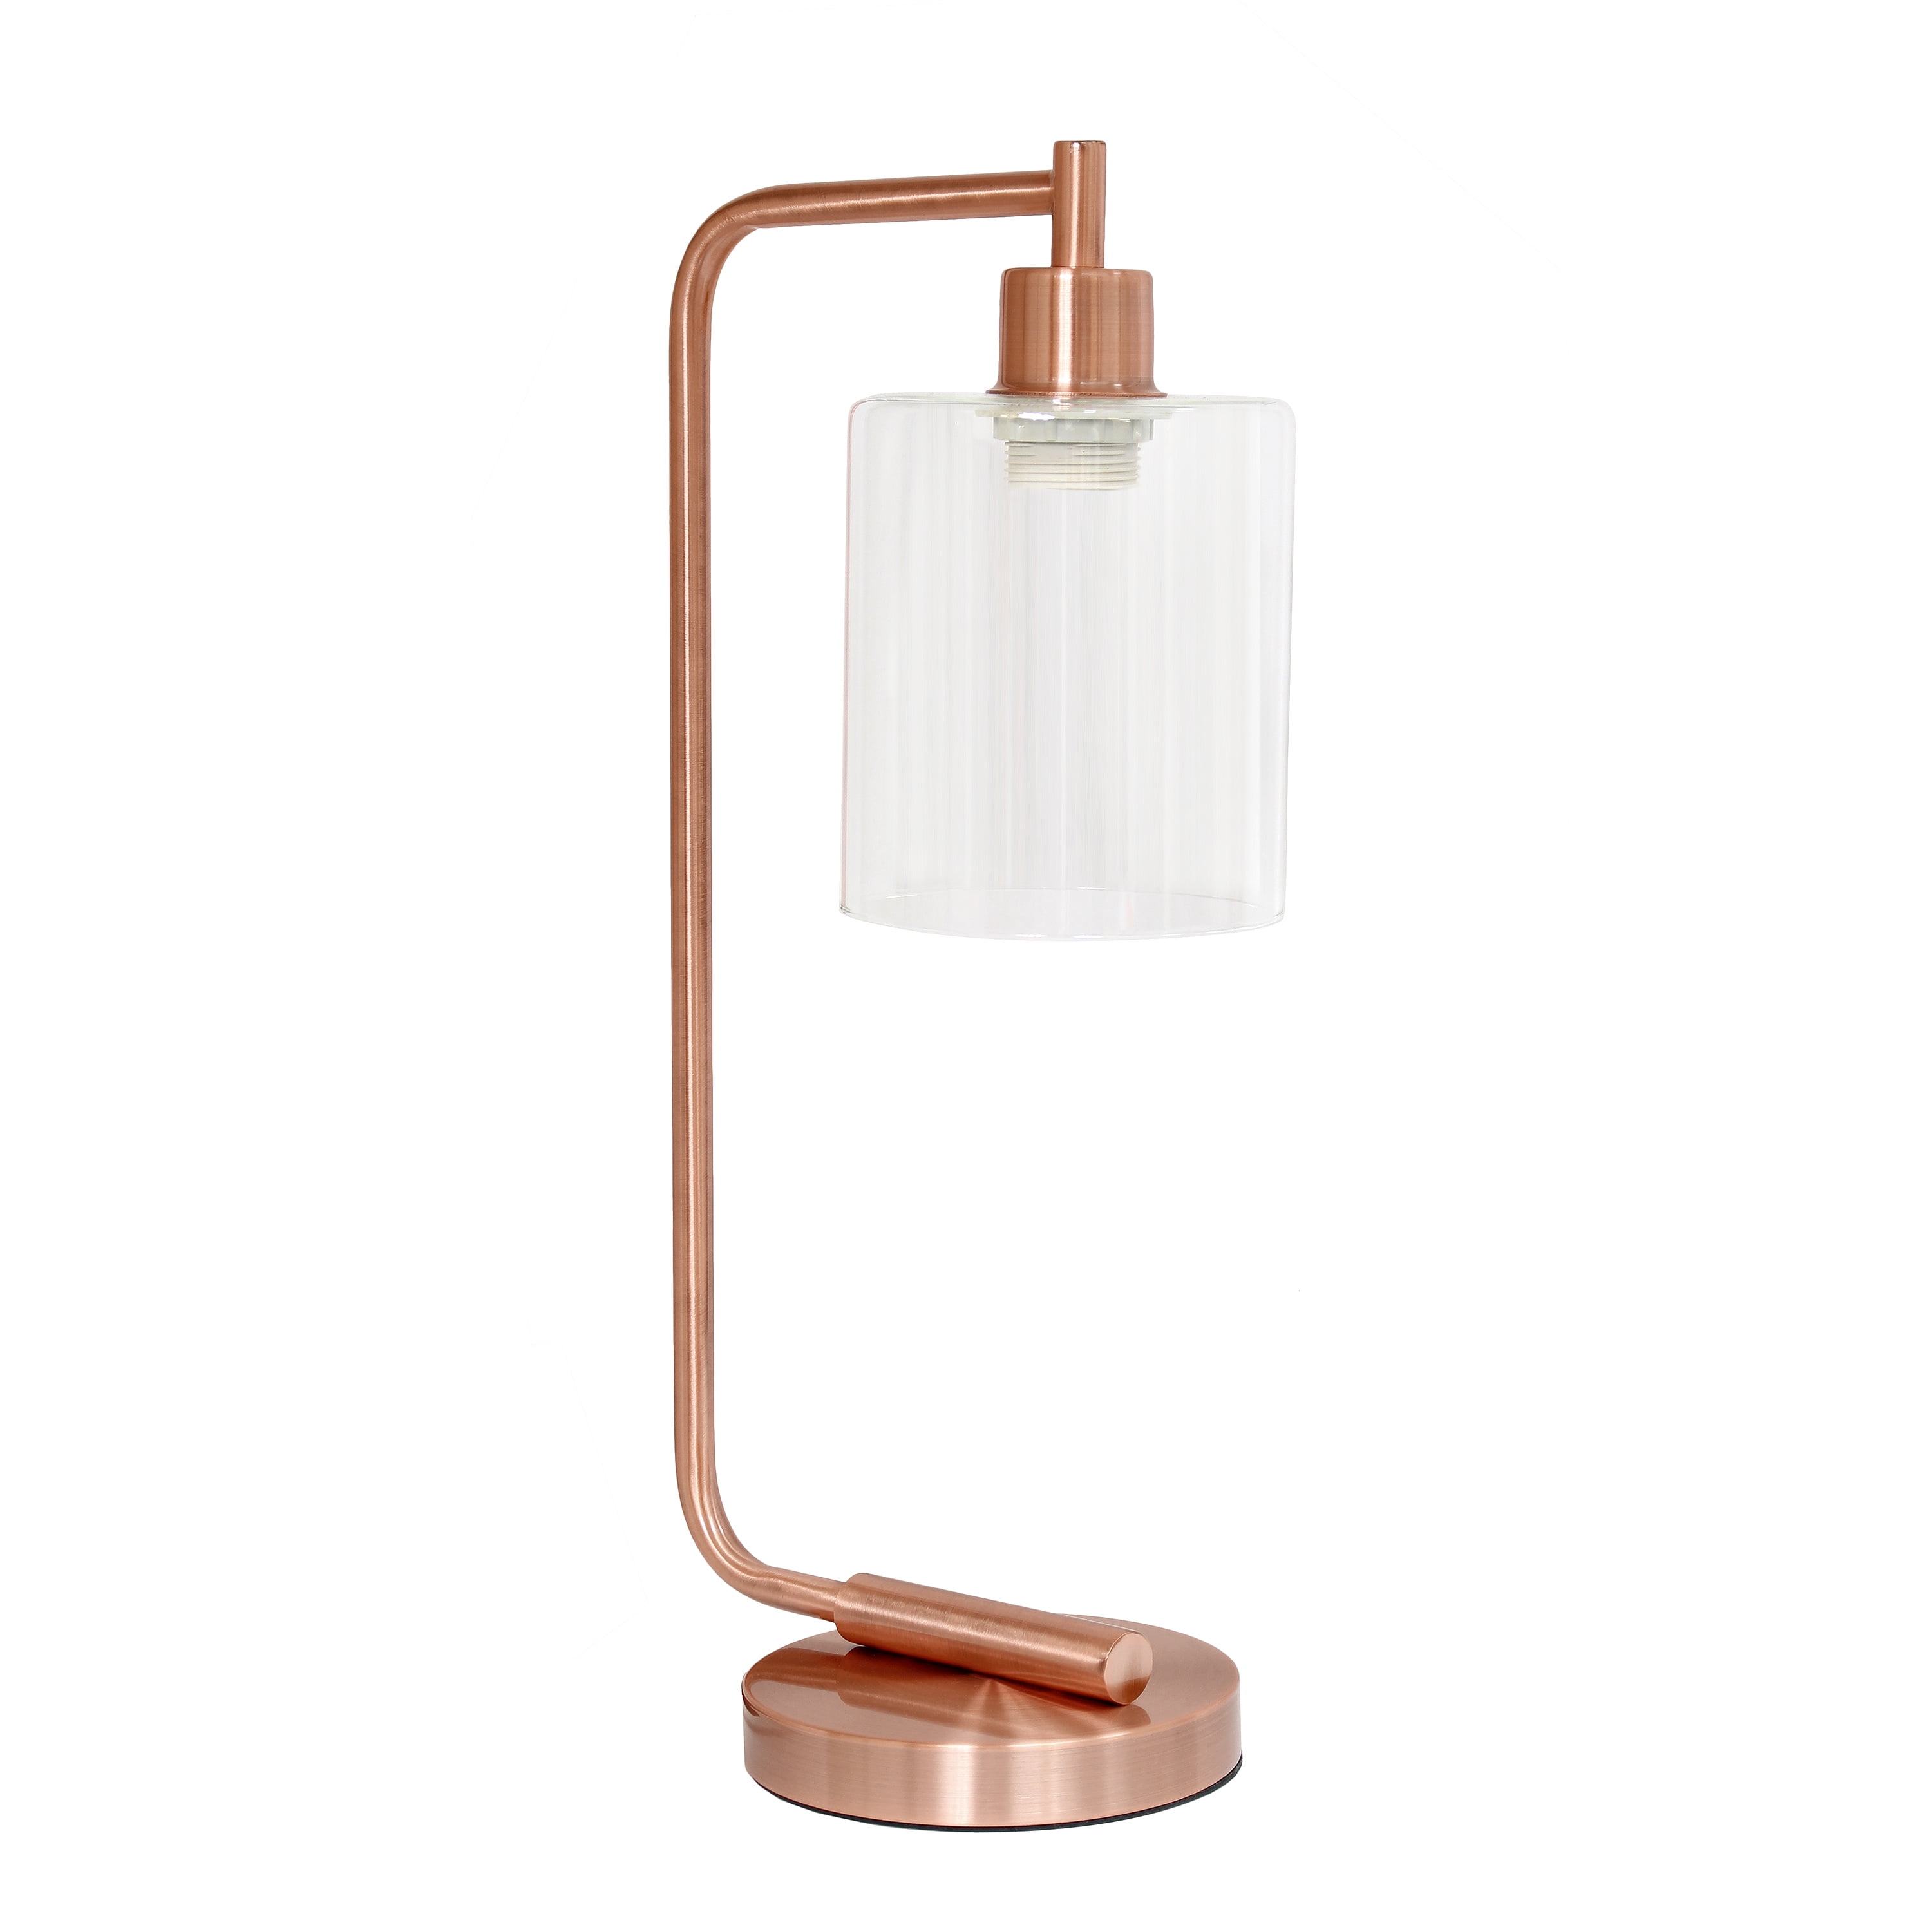 Ld1036-rgd 18.75 In. Bronson Antique Style Industrial Iron Lantern Desk Lamp With Glass Shade, Rose Gold